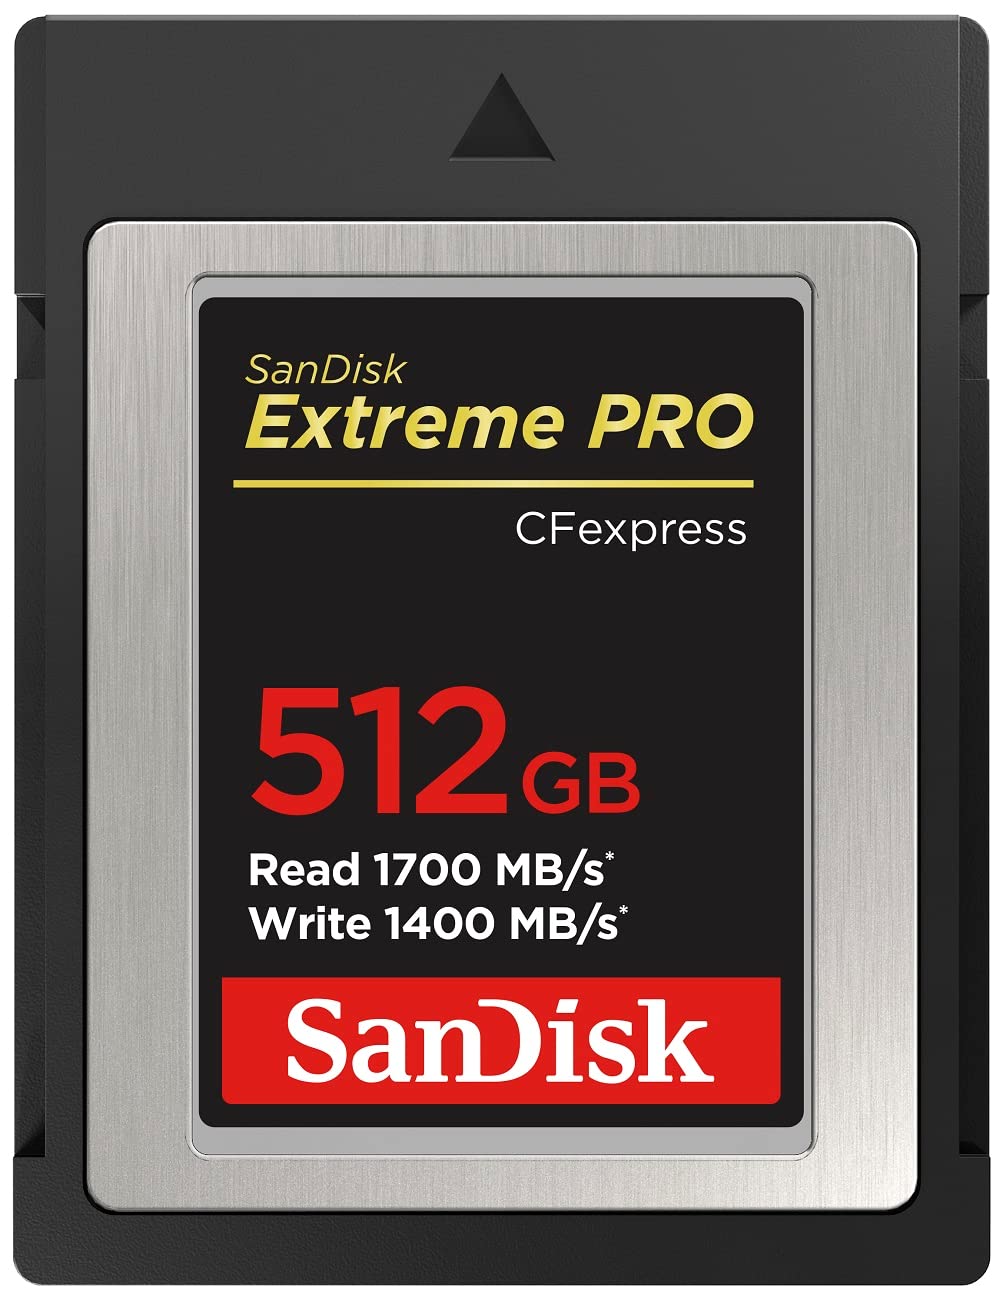 SDCFEXPRESS 512GB EXTREME PRO